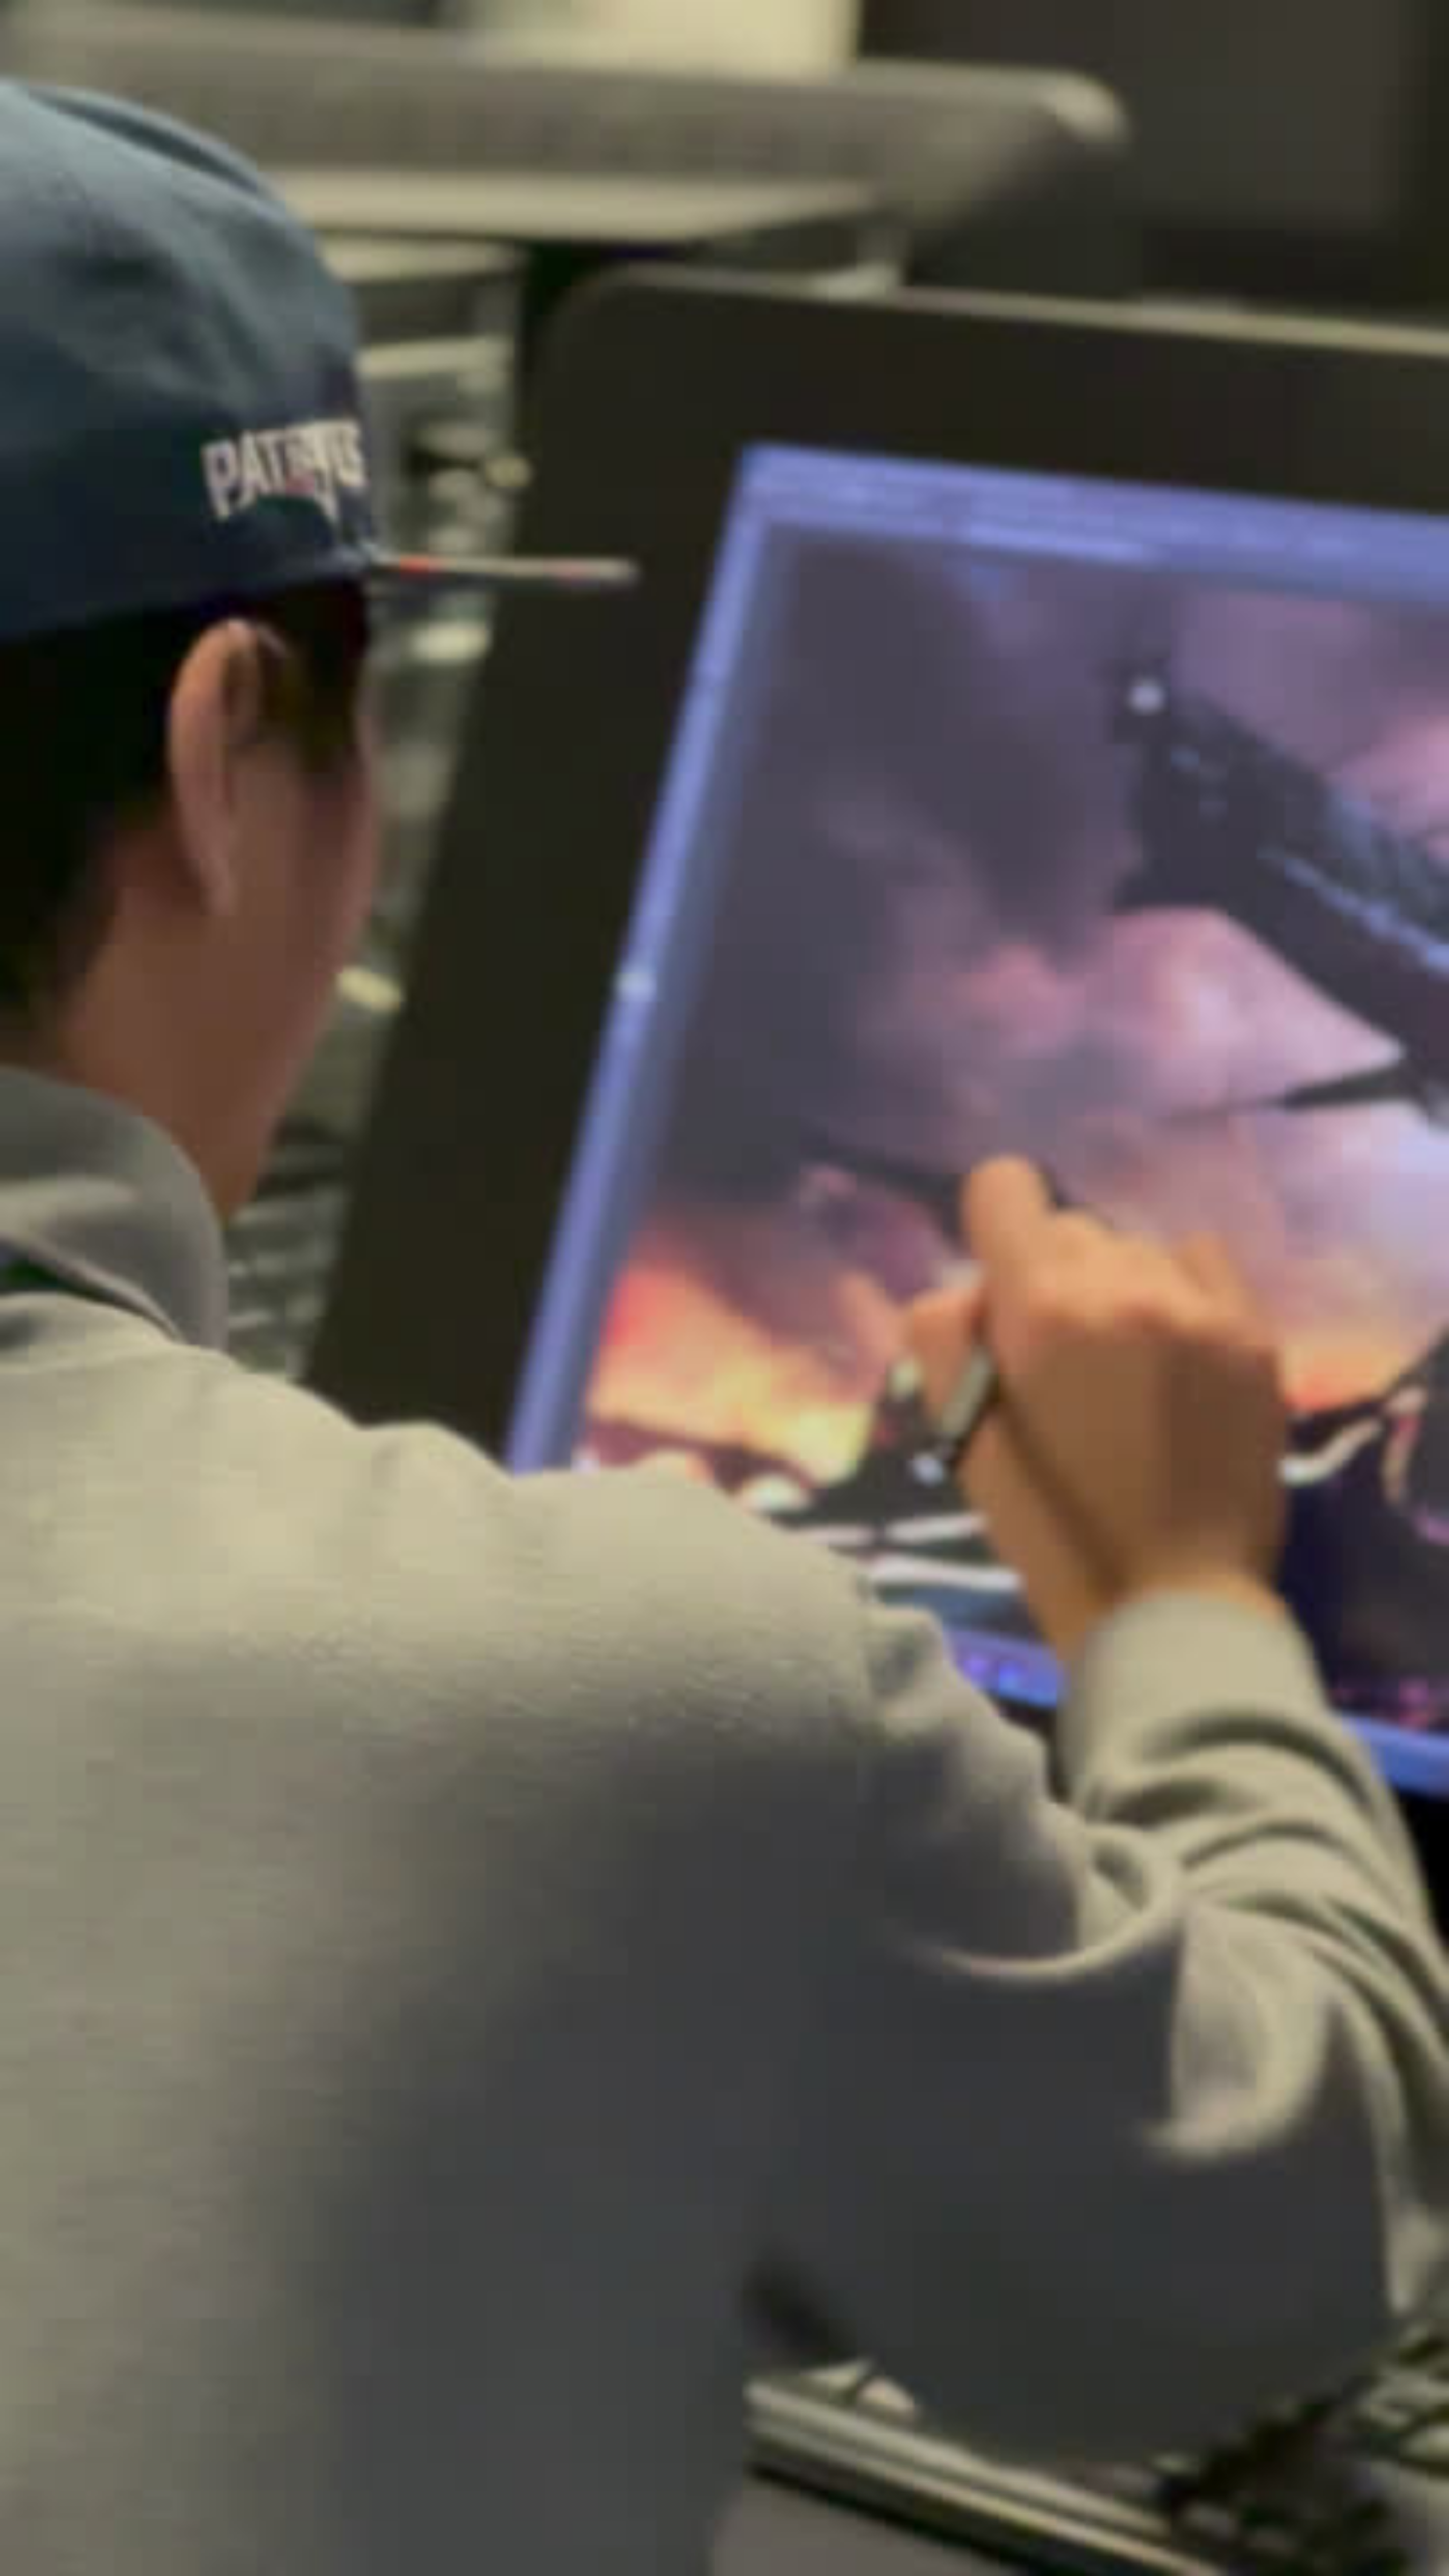 An individual in a baseball cap is focused on creating art on a digital tablet, which displays a colorful, fiery scene.